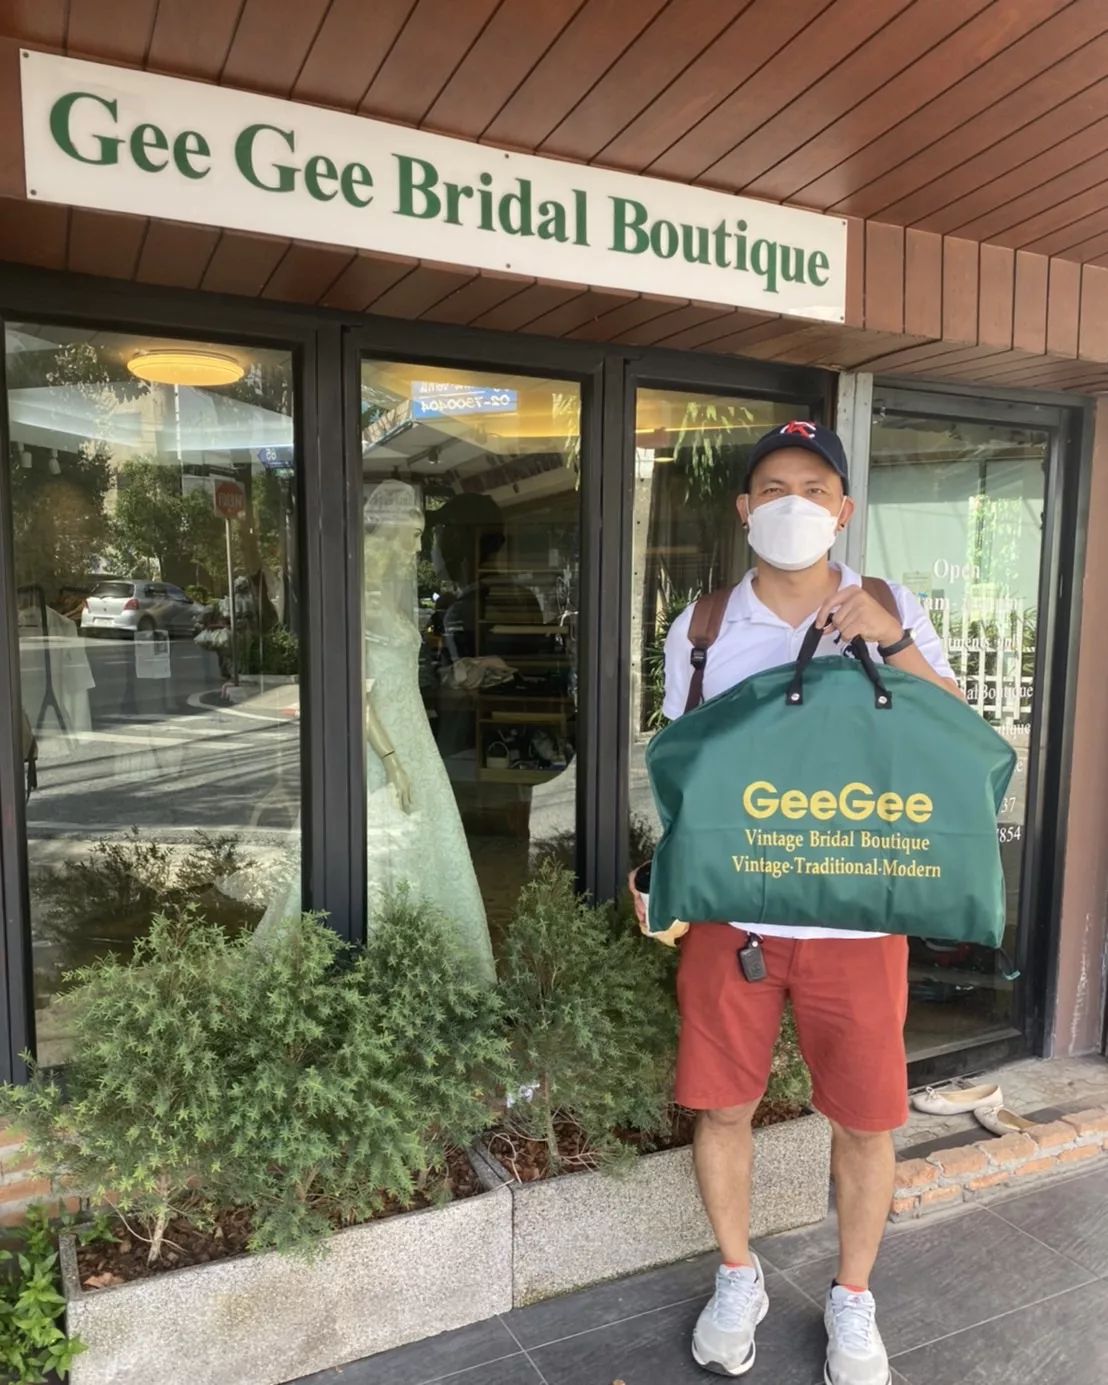 Gee Gee Bridal Boutique - Customer Reviews